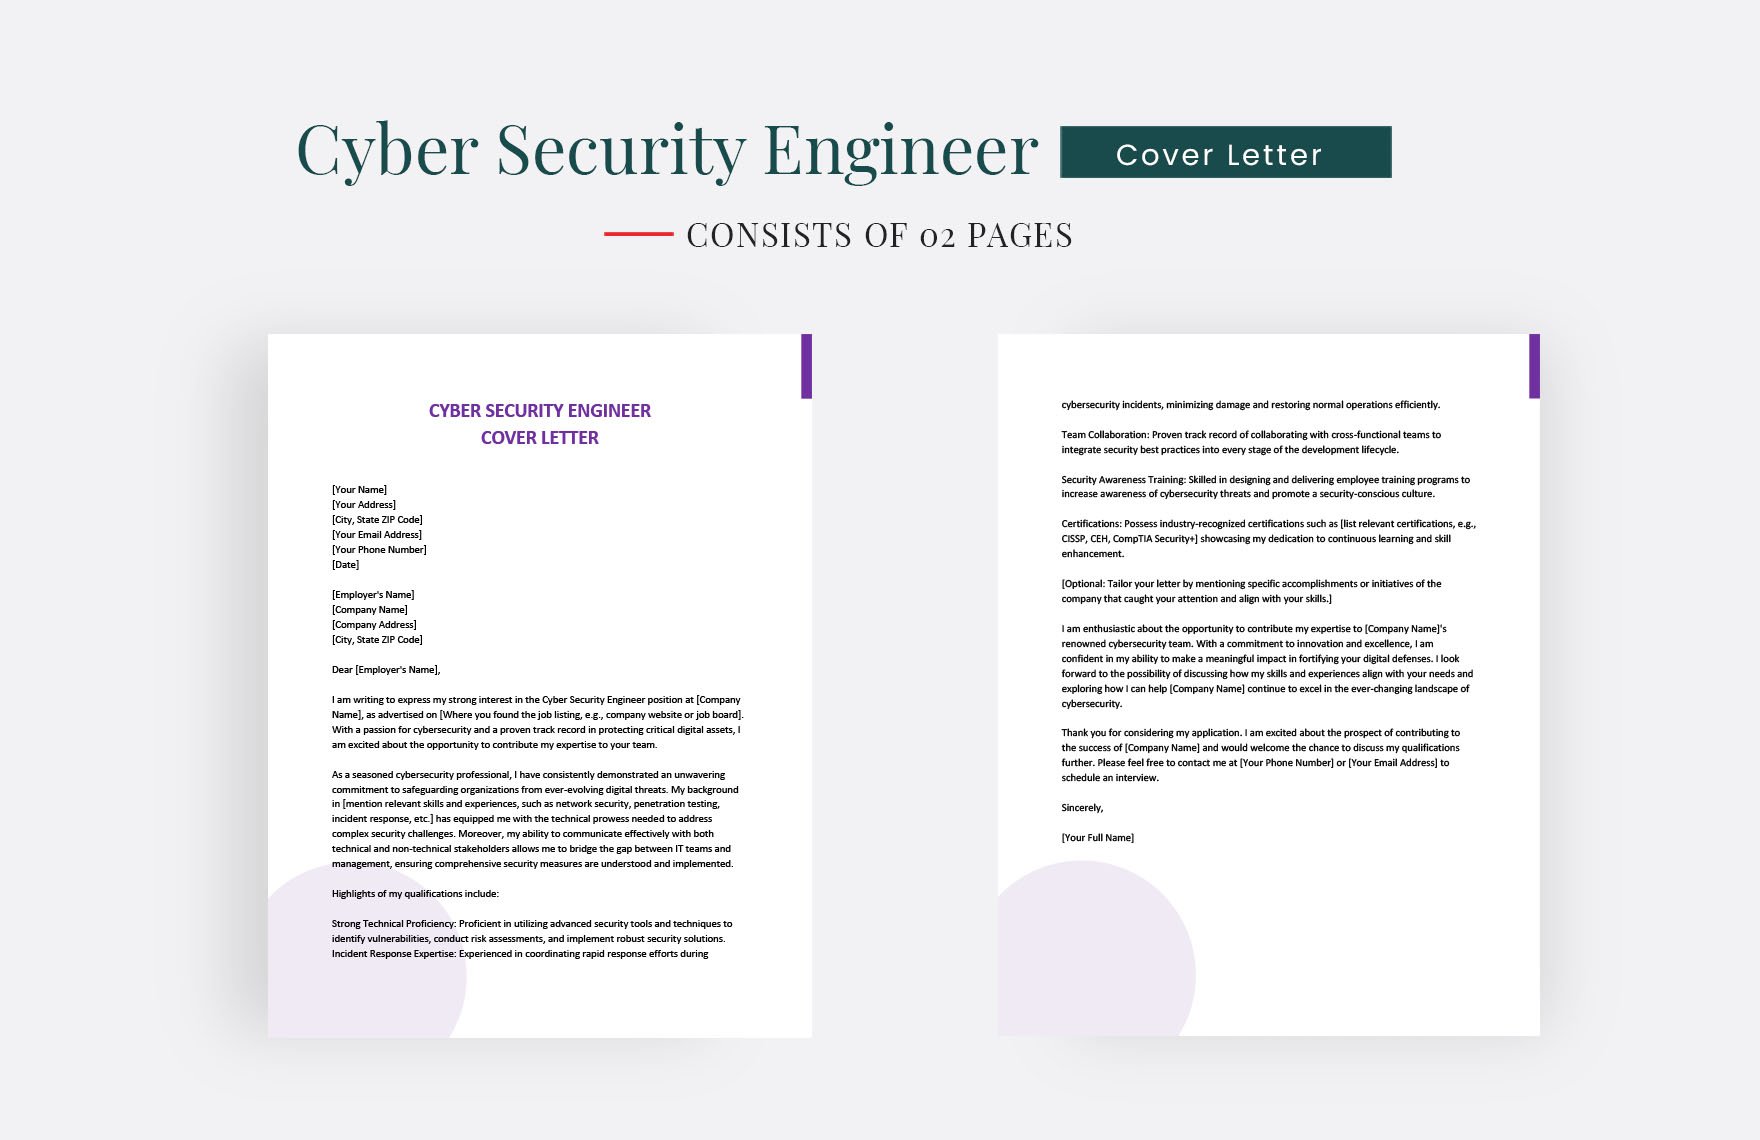 Cyber Security Engineer Cover Letter